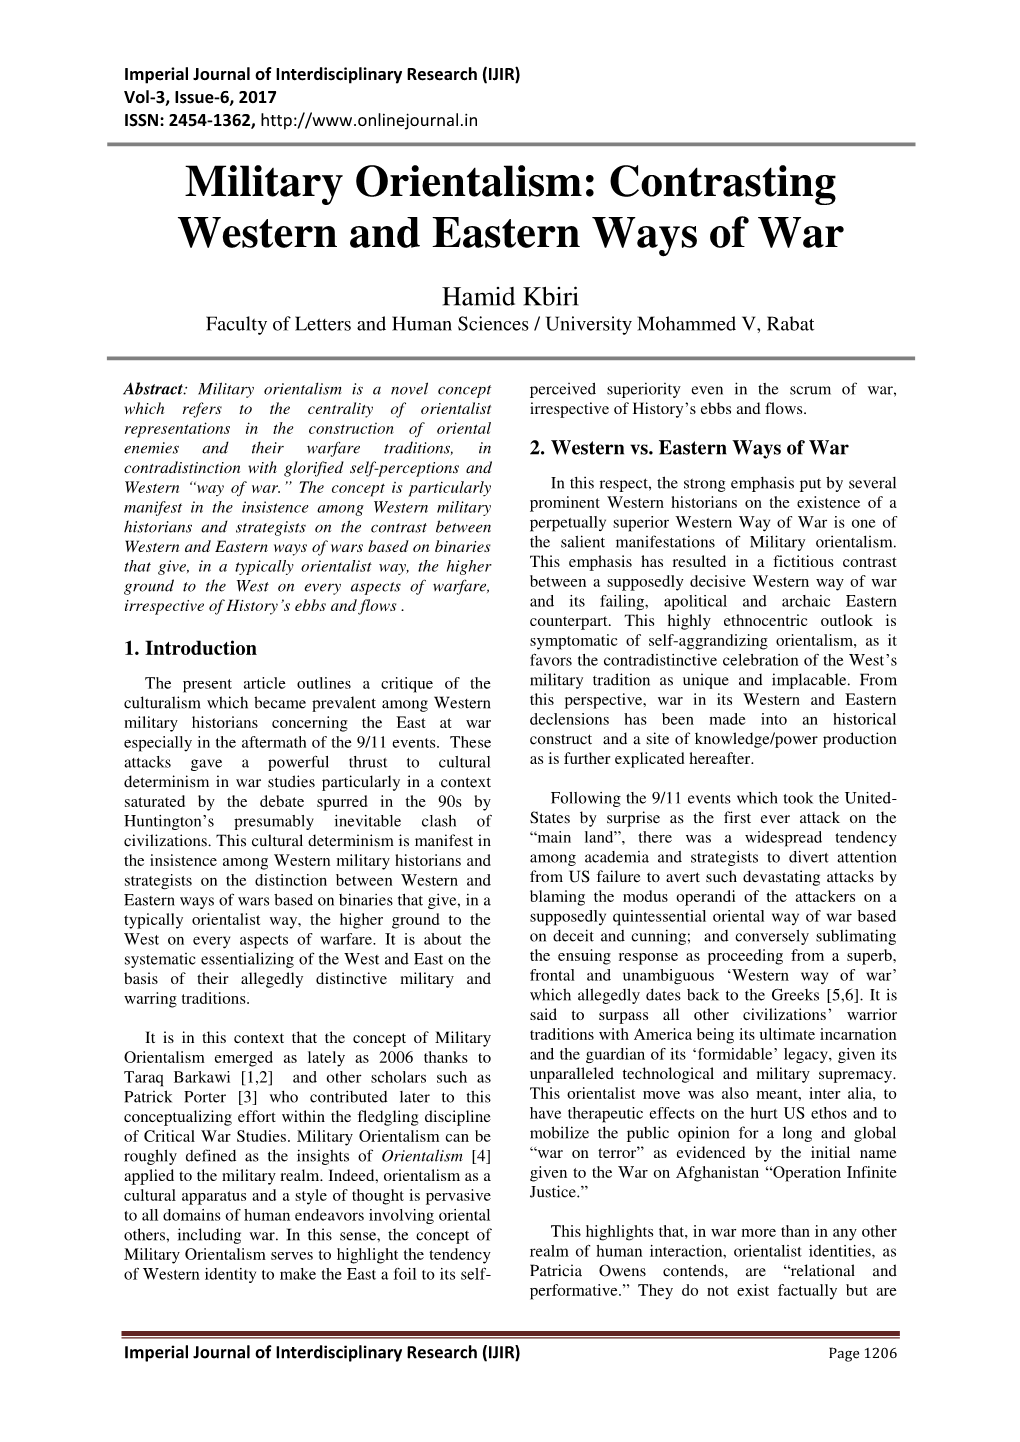 Military Orientalism: Contrasting Western and Eastern Ways of War